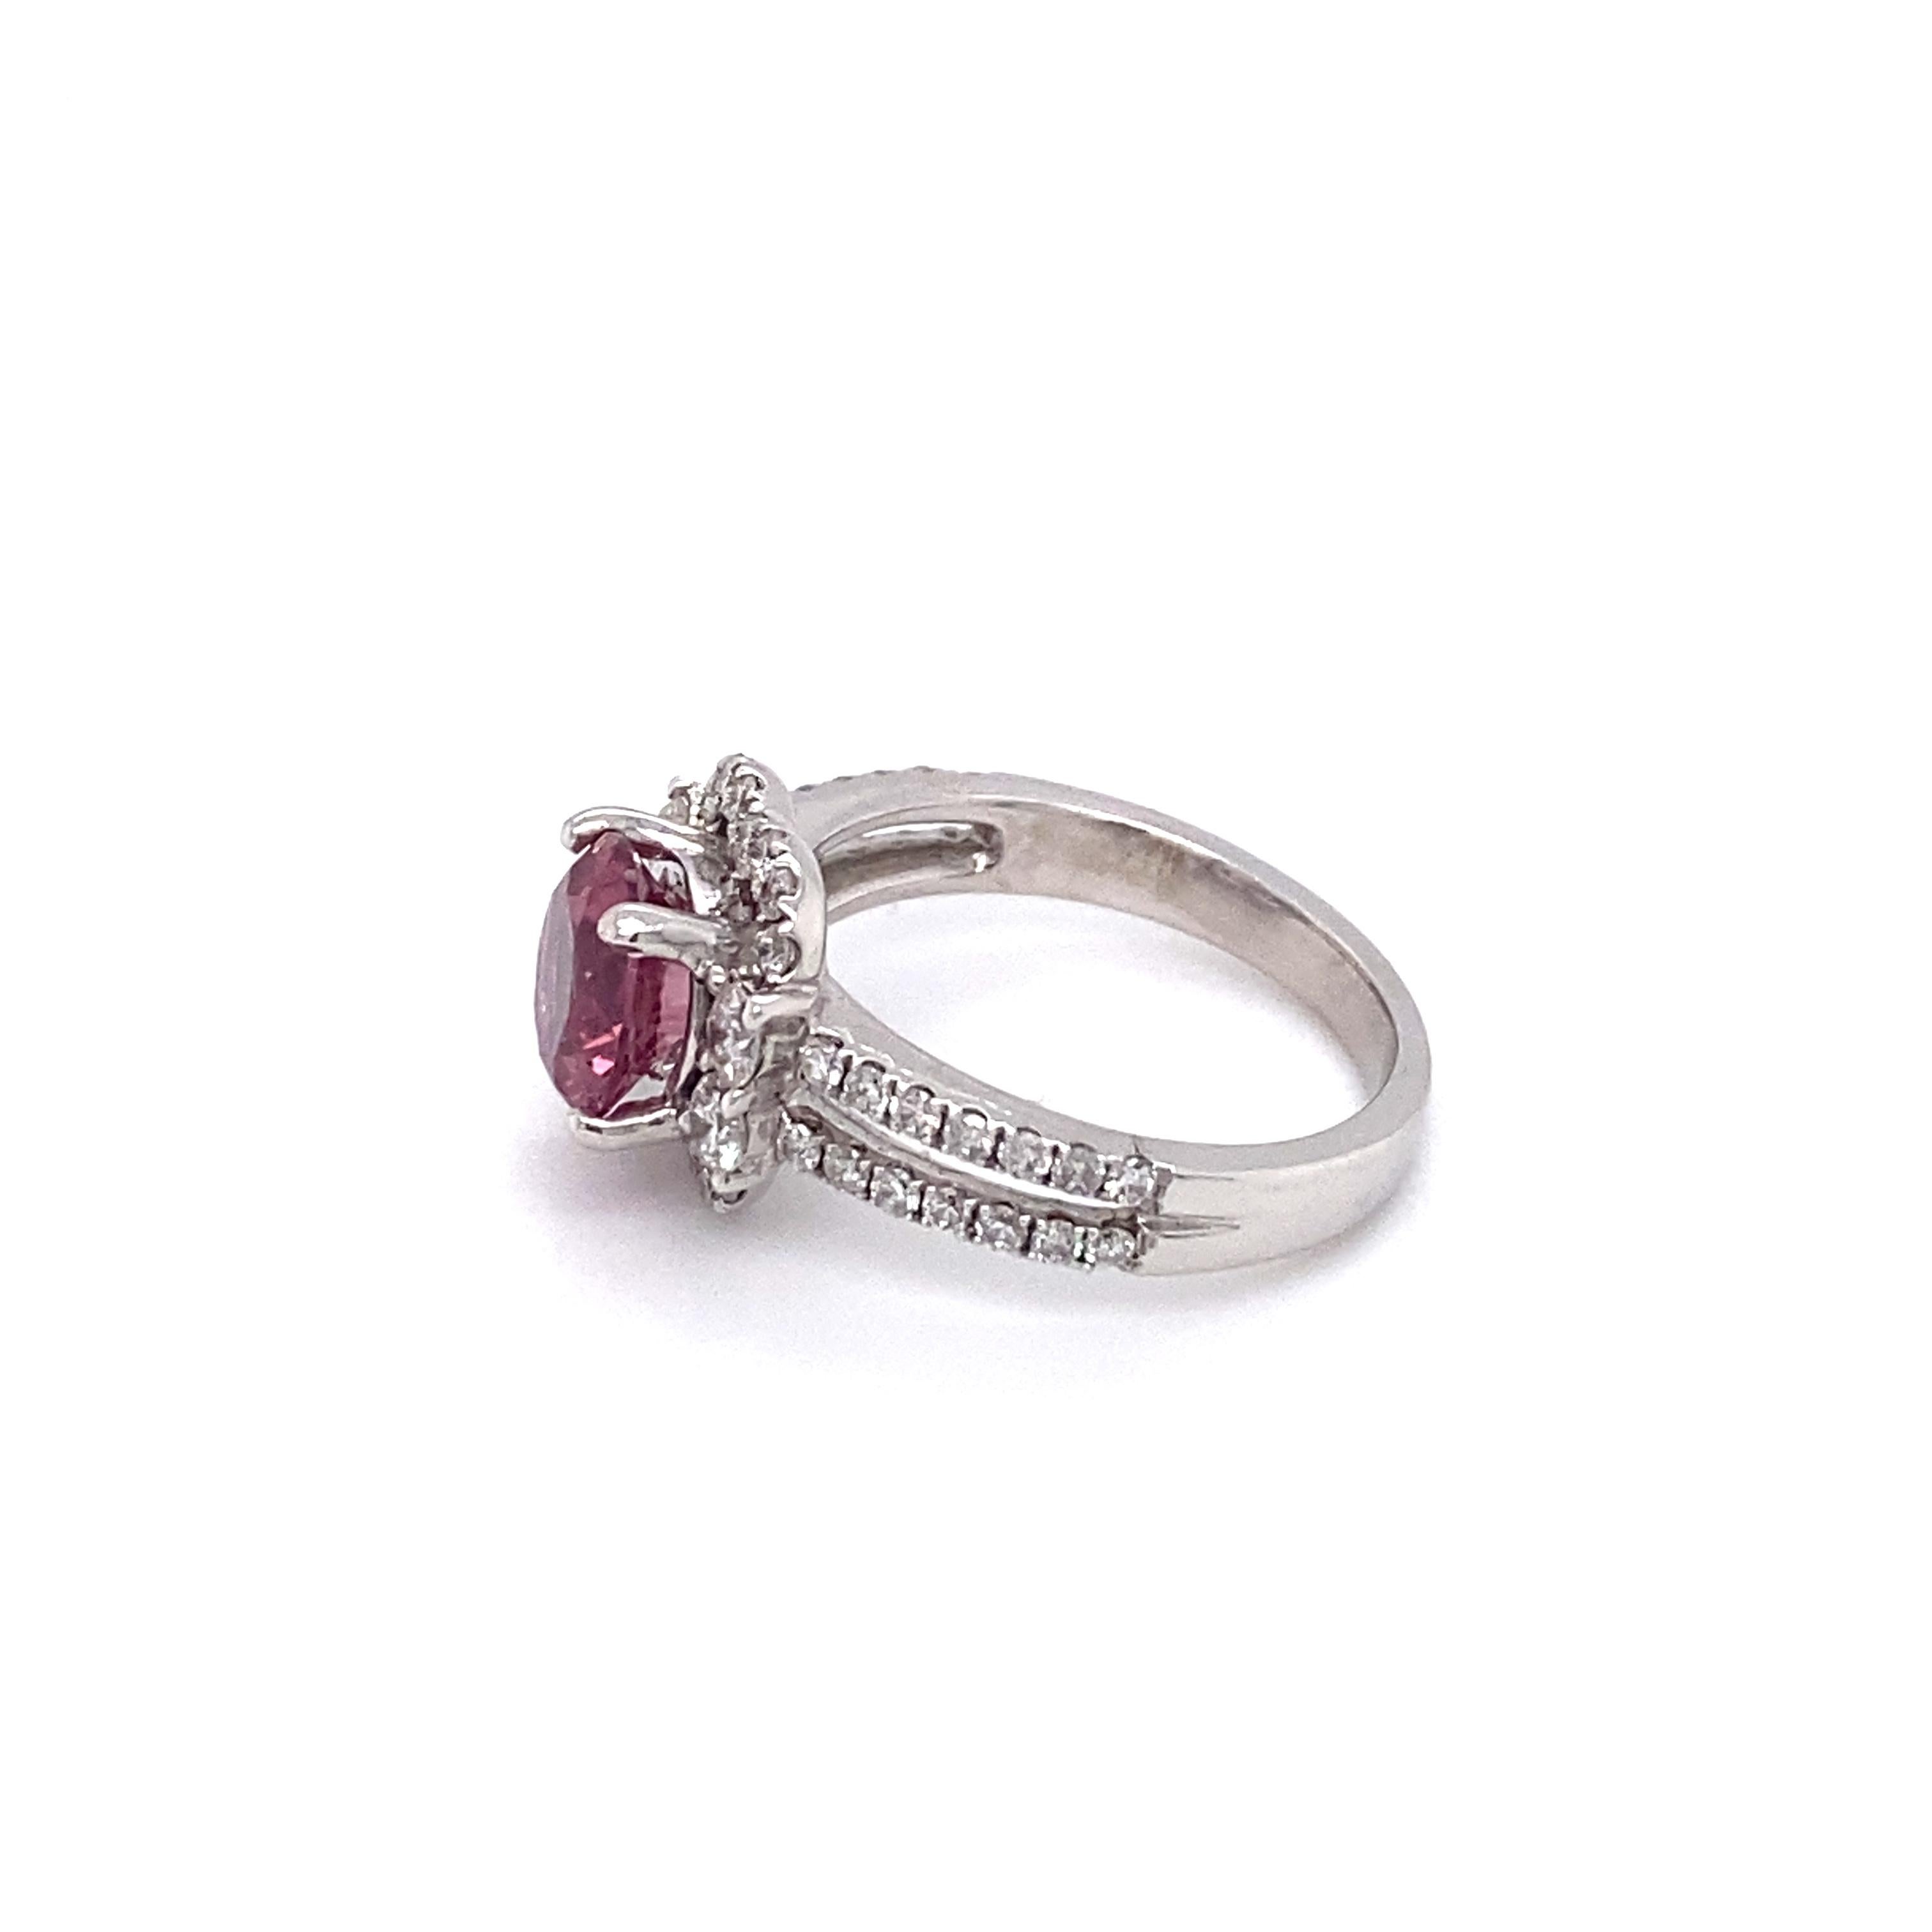 Art Deco Circa 1980s Pink Tourmaline and Diamond Engagement Ring in 18K White Gold For Sale